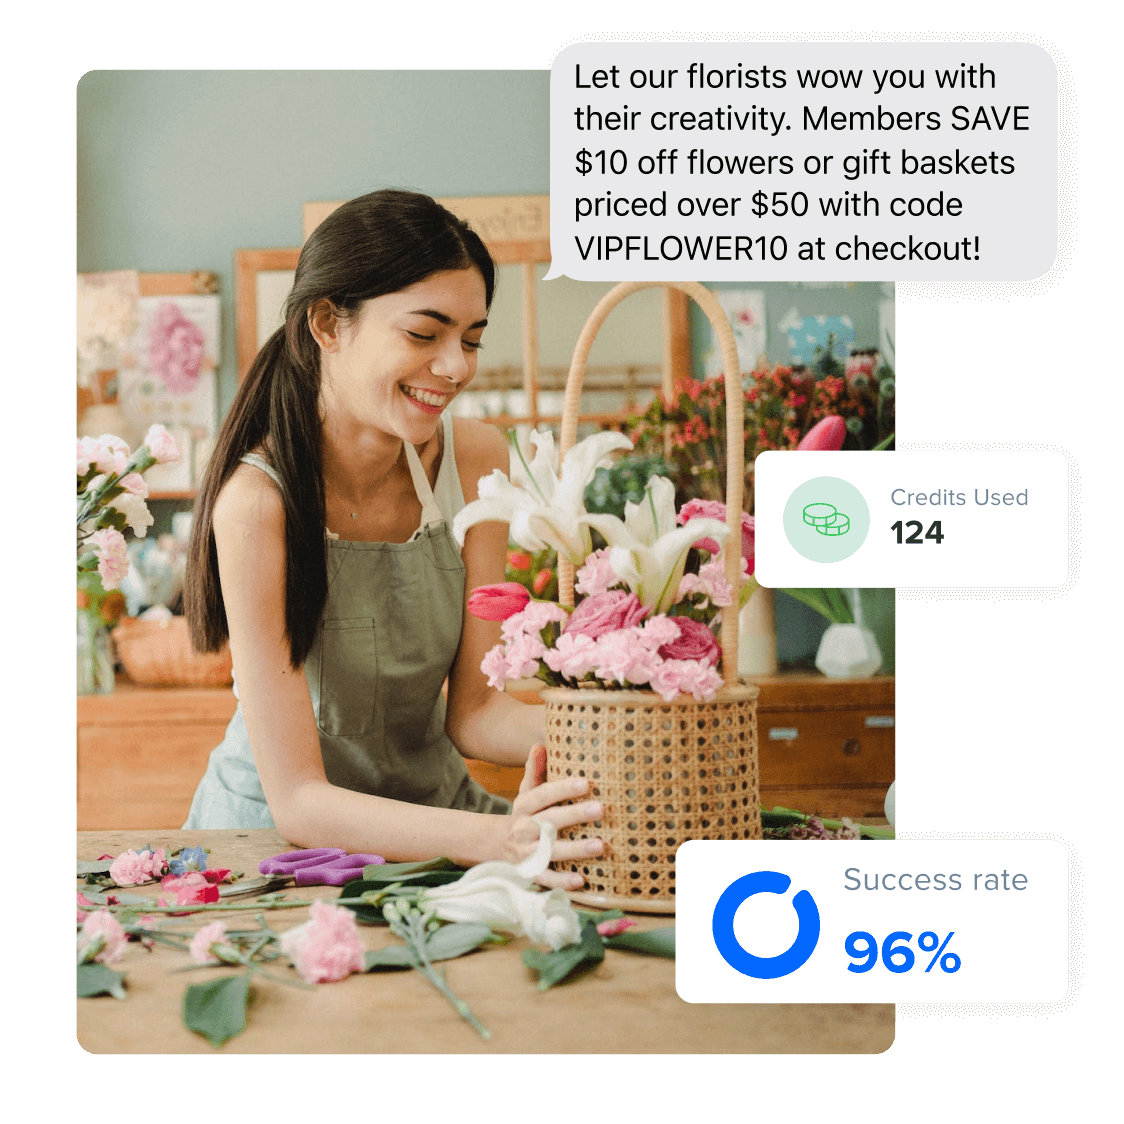 A smiling florist arranging a basket of flowers, with an SMS notification about a member discount, emphasizing the effective use of mass texting for marketing promotions in the floral industry and tracking campaign success rates.